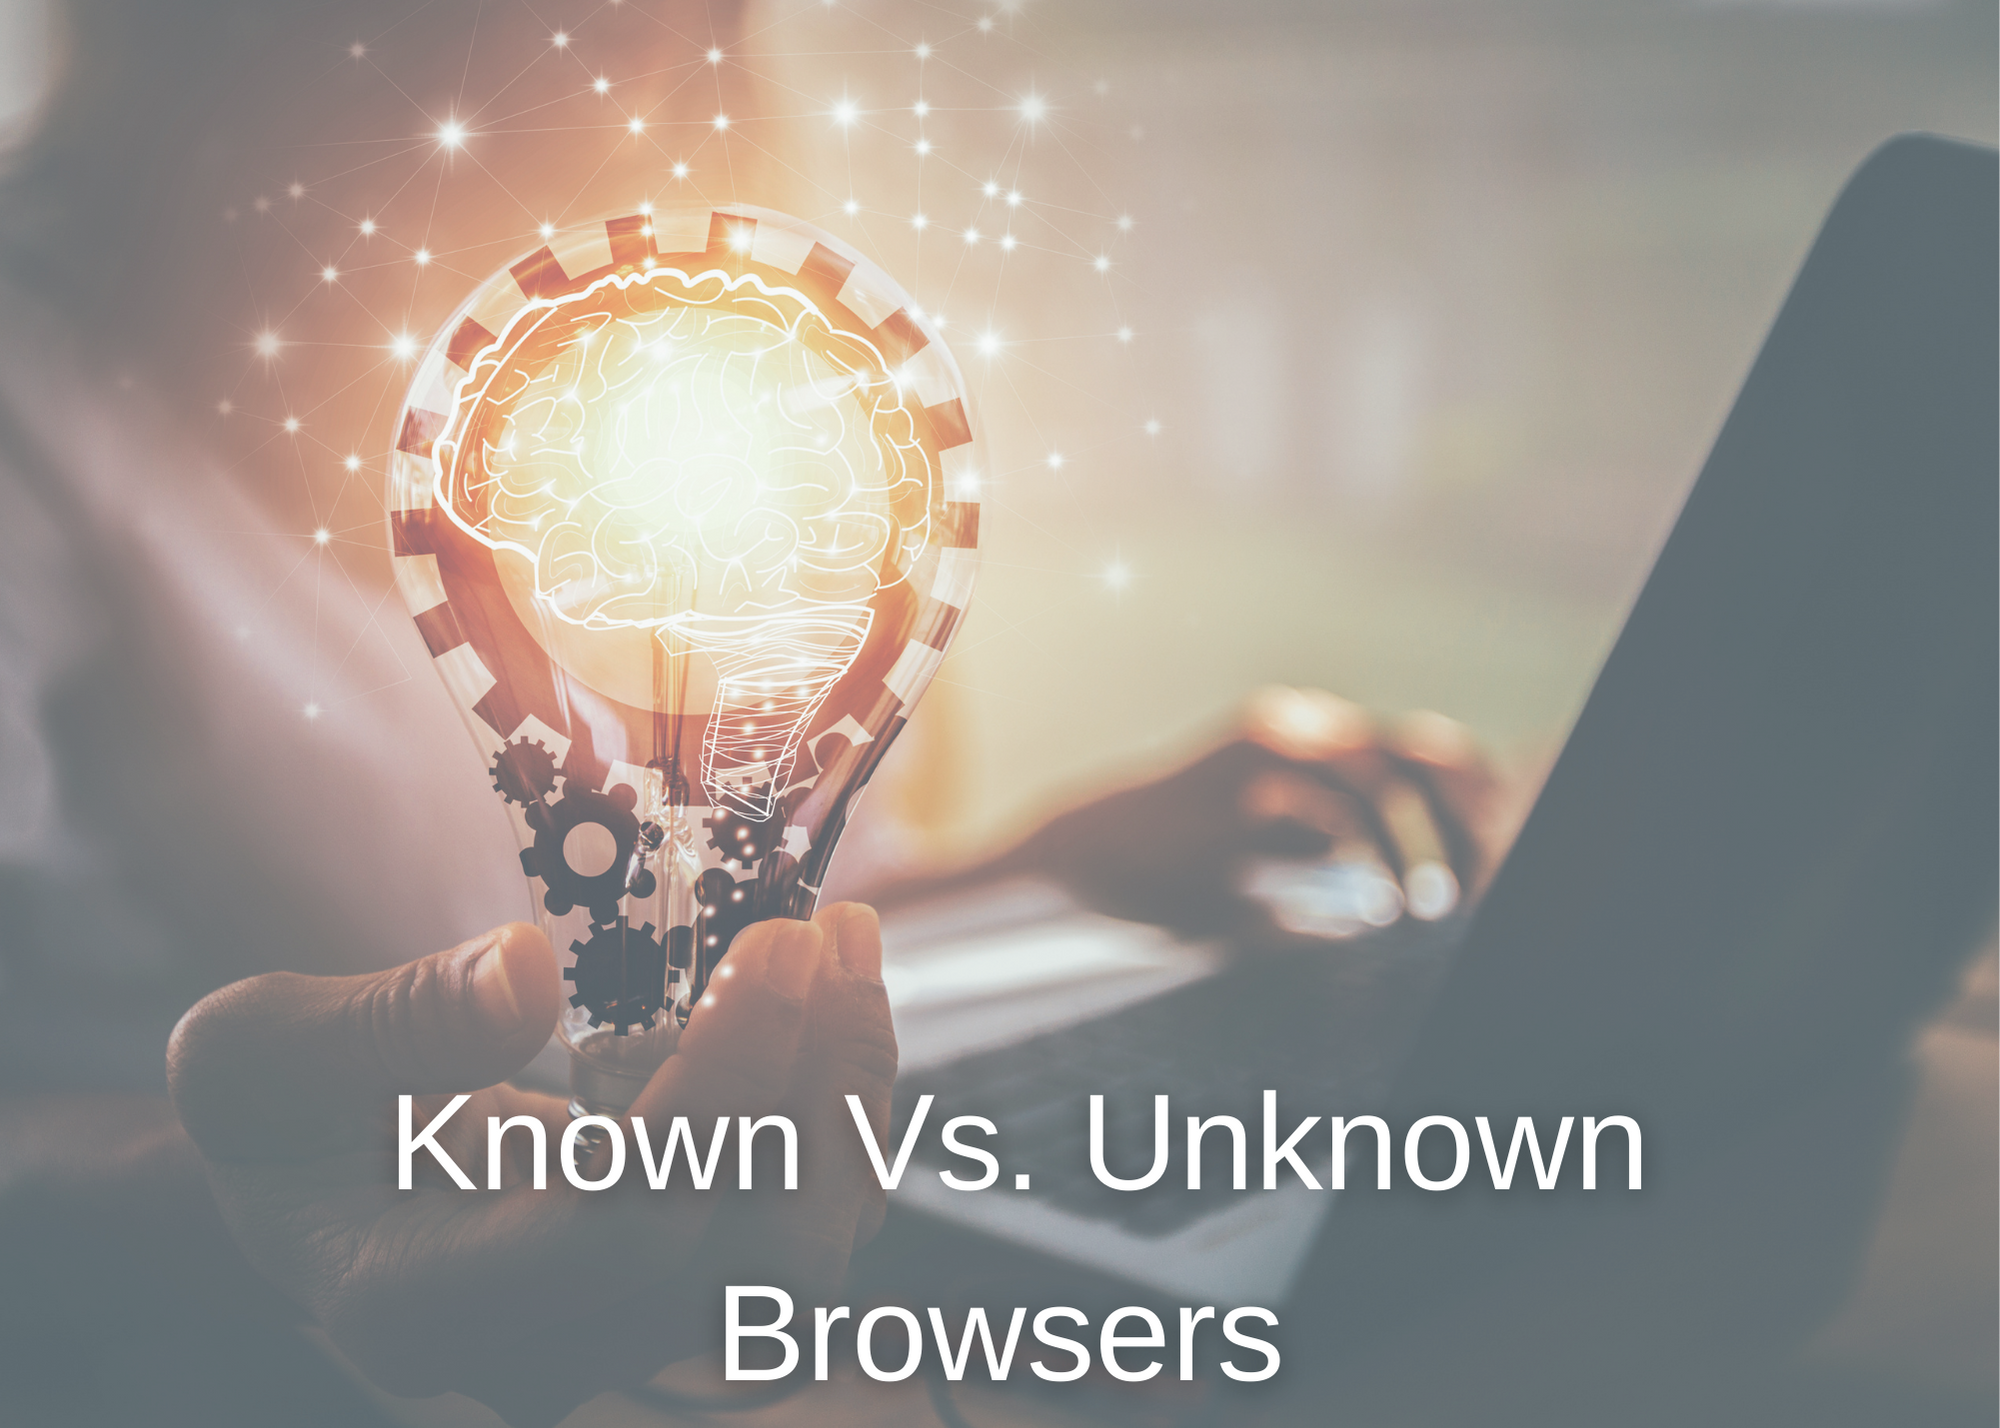 Marketing in a Minute — Known VS. Unknown Browsers